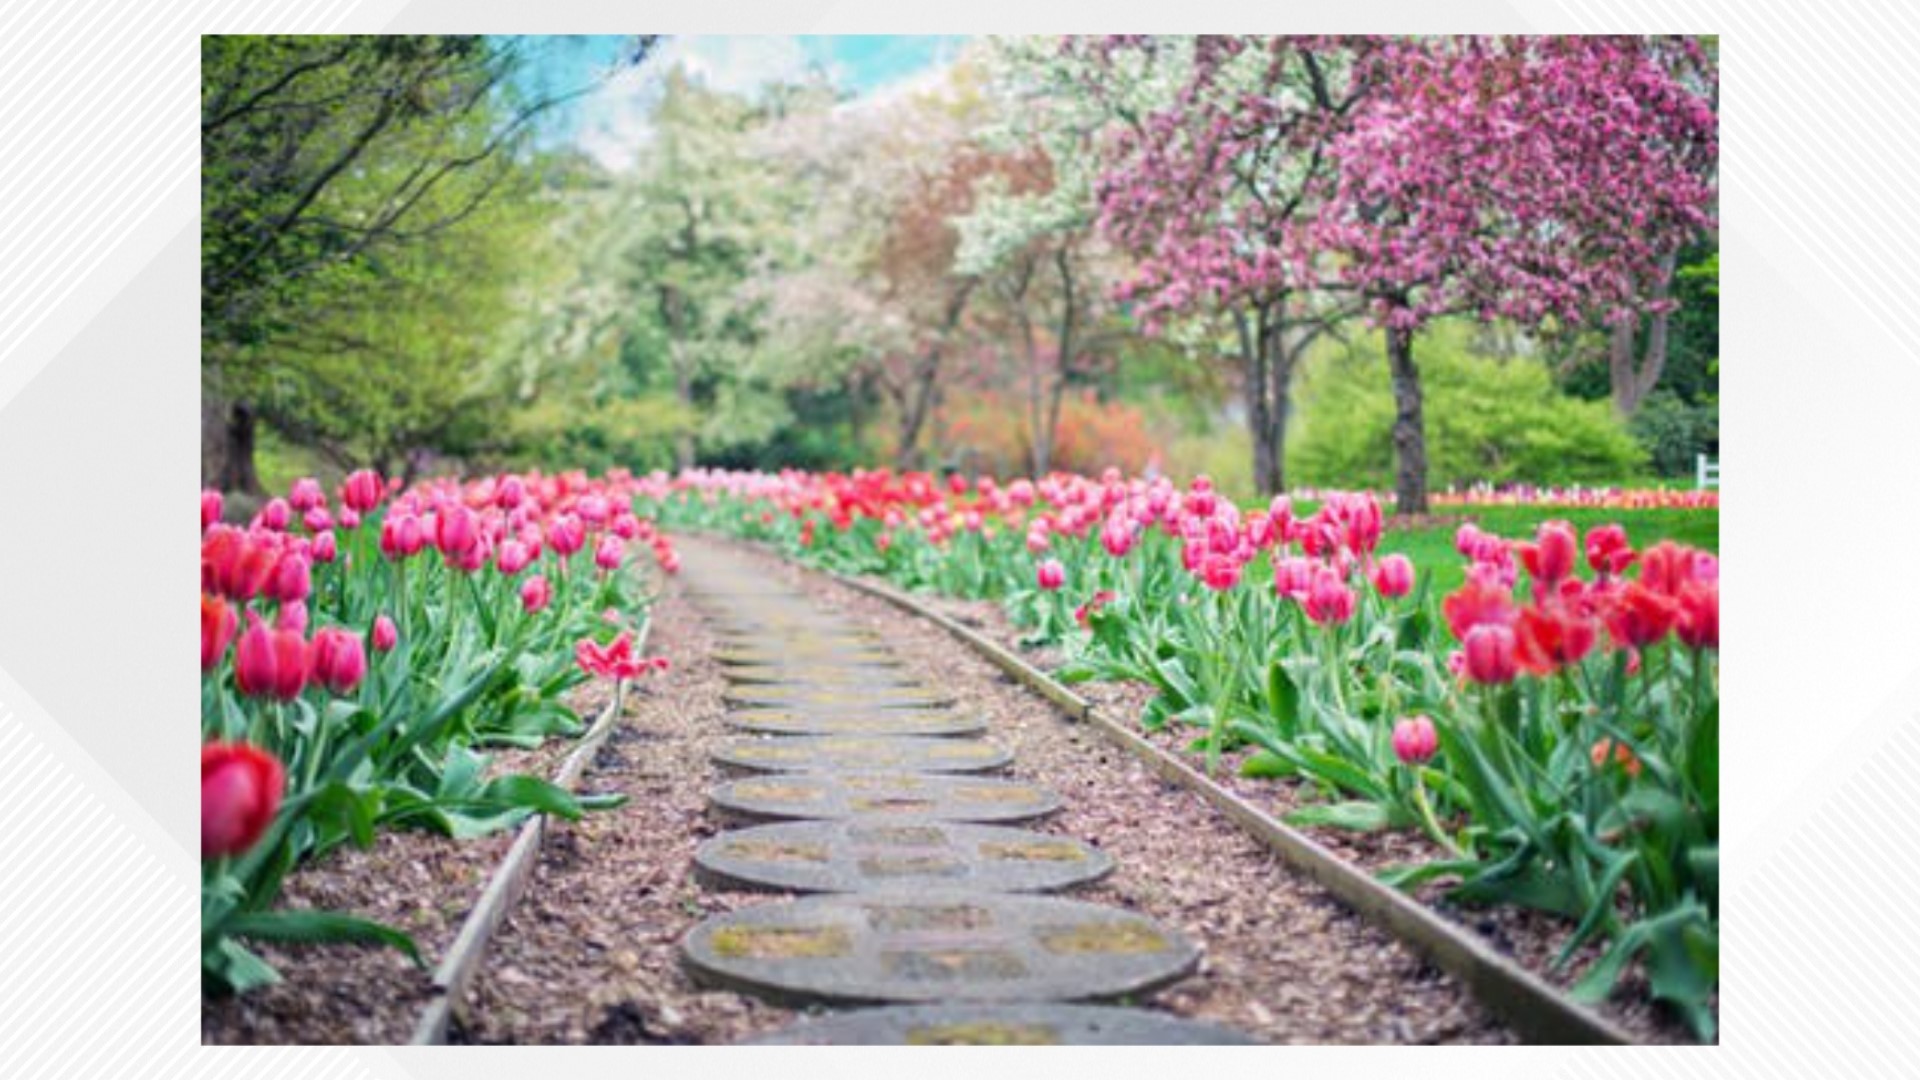 Diane Phillips does a deep dive into the common springtime phrase "April showers bring May flowers". We learn where the phrase comes from, and if it's true!